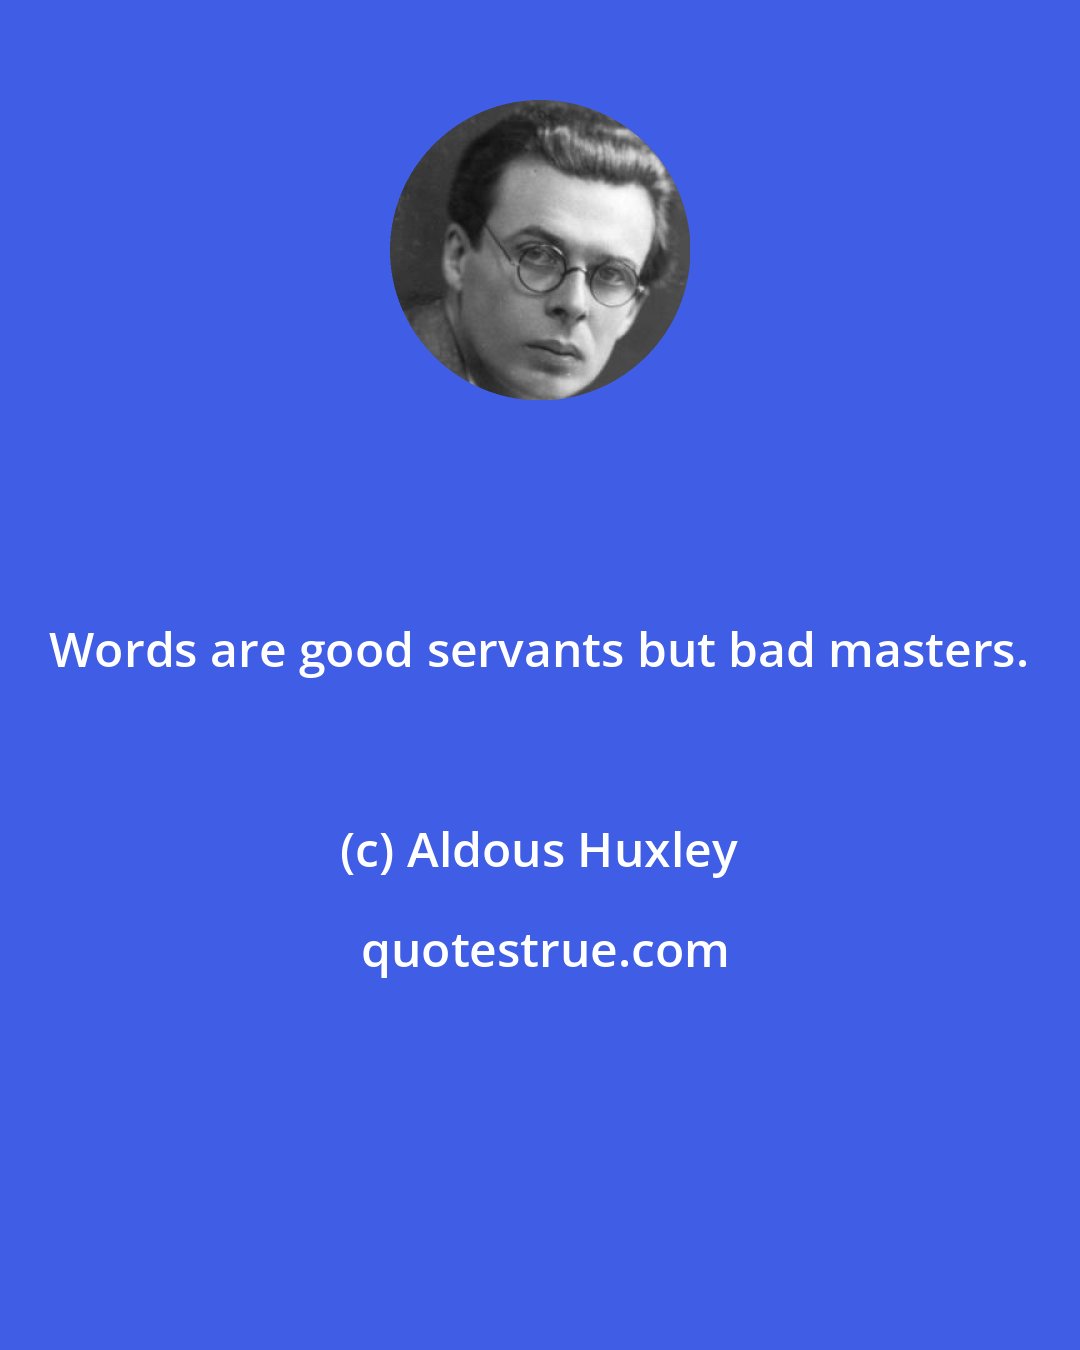 Aldous Huxley: Words are good servants but bad masters.